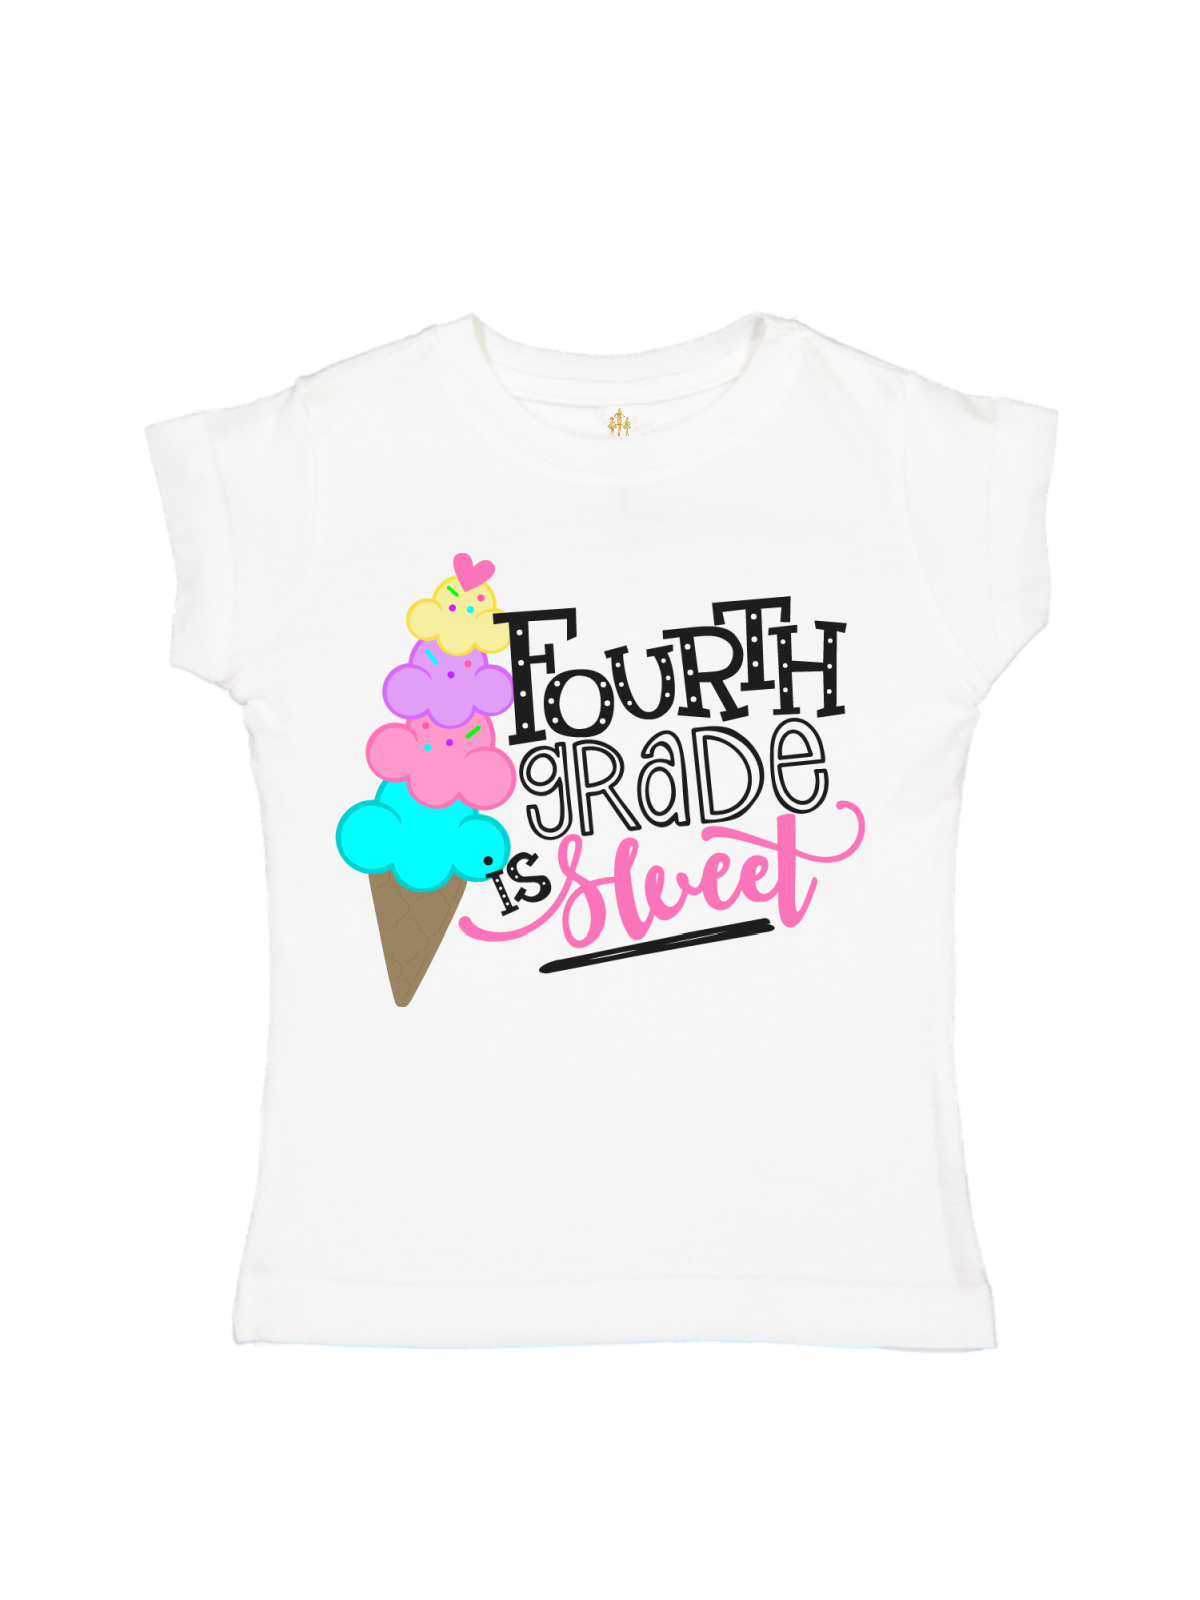 Fourth Grade is Sweet Girls First Day of School Shirts in Black, White, Pink, and Blue